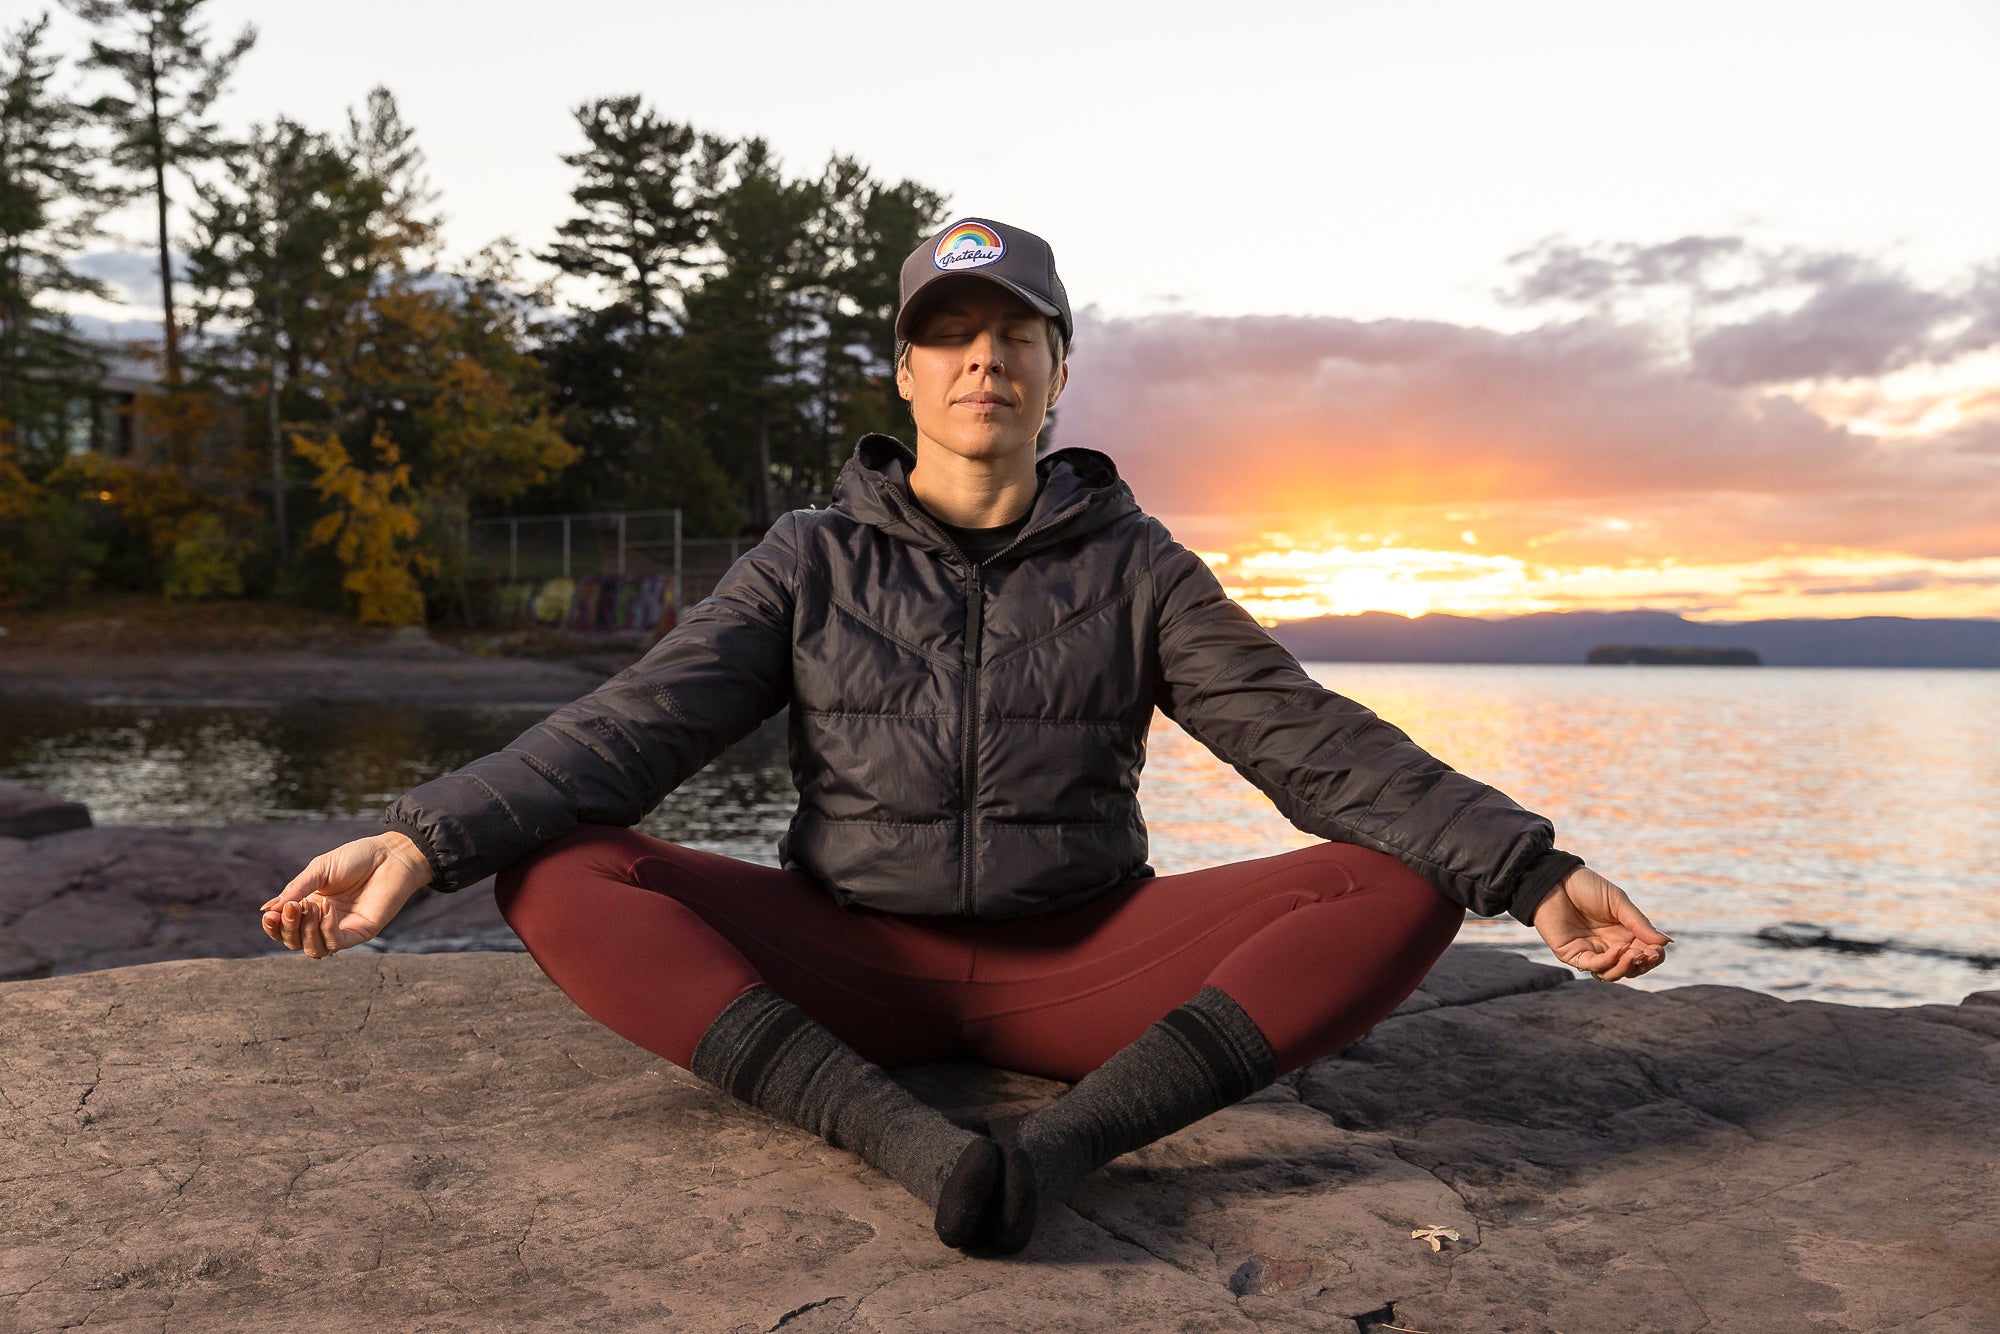 Woman sitting on a rock in a yoga position with her feet together meditating.  The sun is setting behind her reflected in the water.  She is wearing the dark grey Purra Crew Socks on her feet as well as dark colored leggings, an insulator jacket and a baseball cap